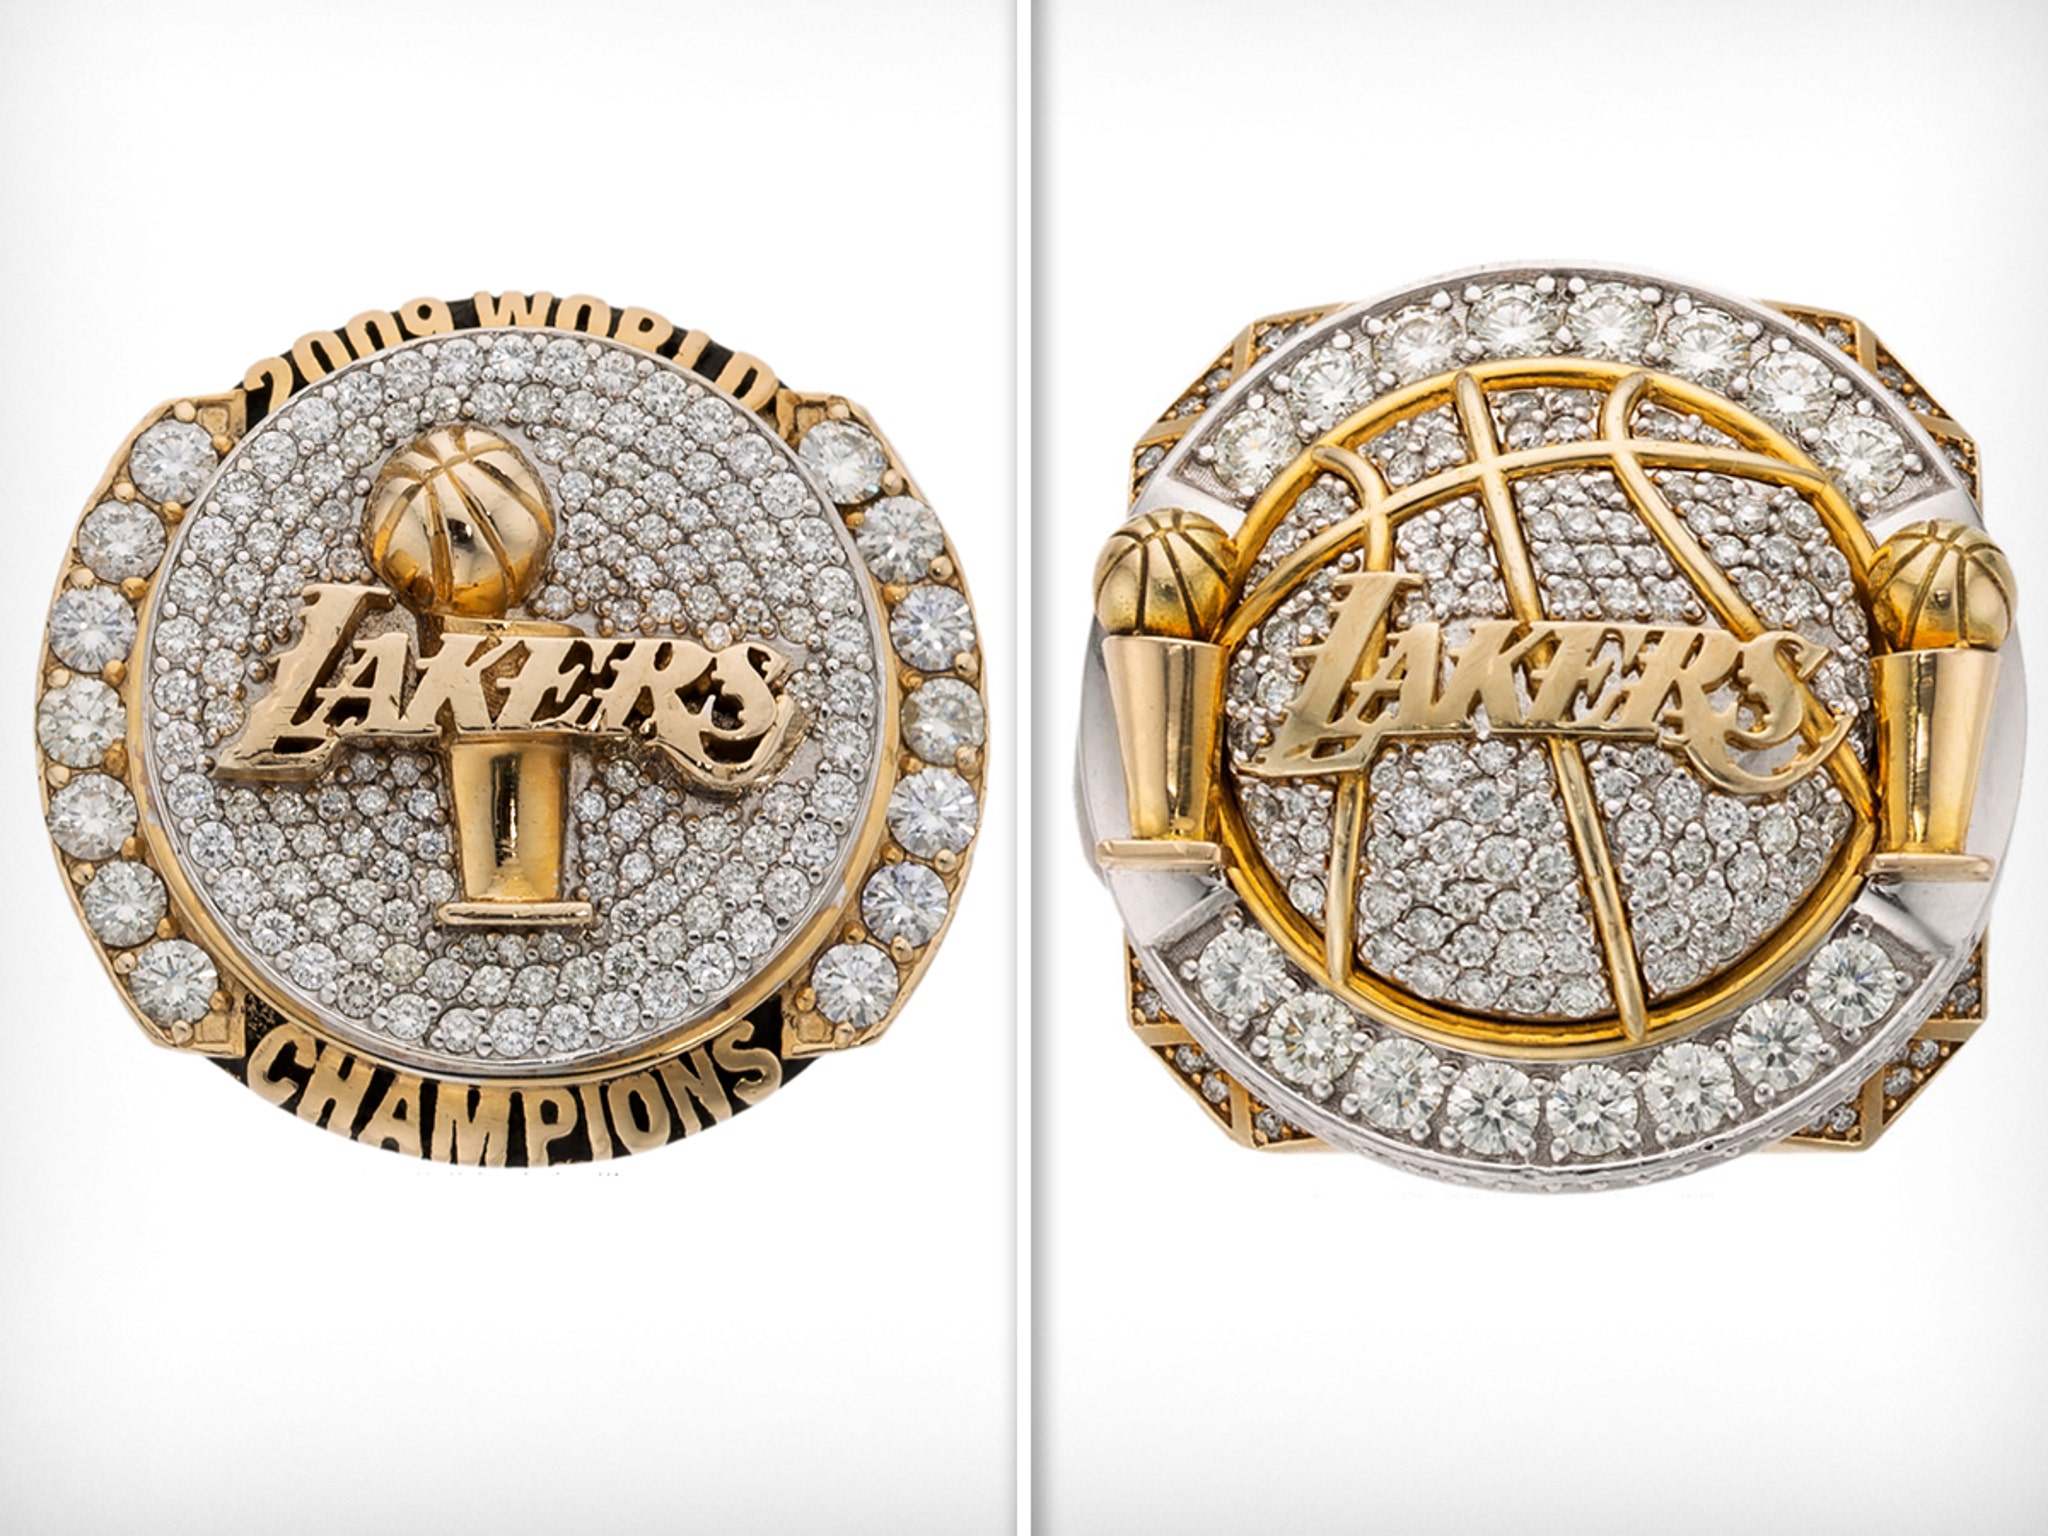 Lamar Odom pawned his championship rings. Now they're on auction for  $100,000